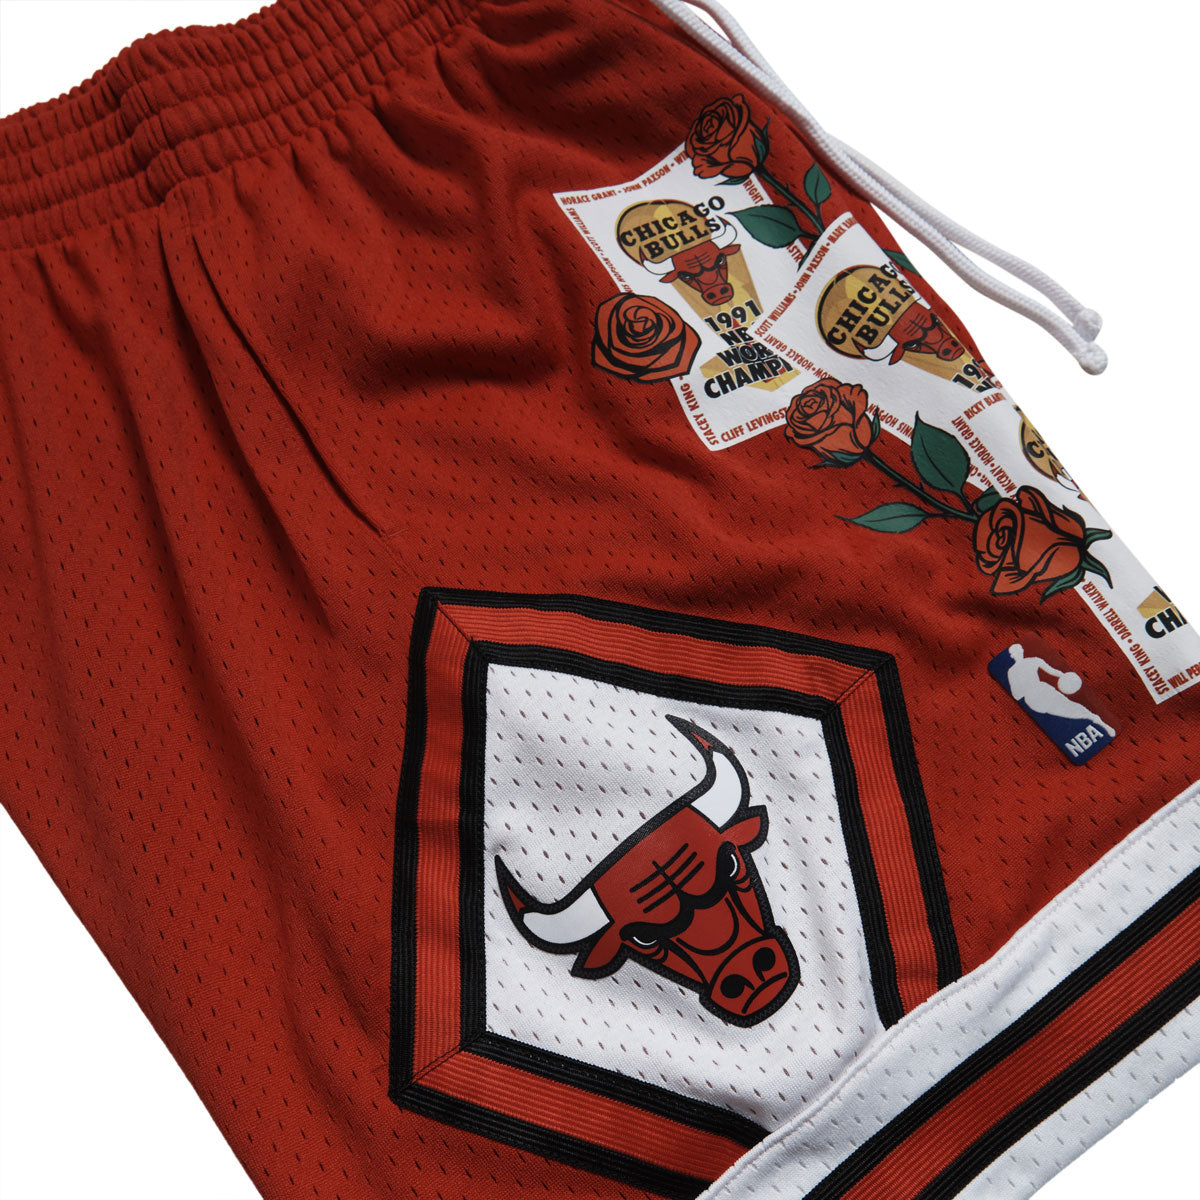 Mitchell & Ness x NBA Roses And Banners Bulls Shorts - Scarlet image 3